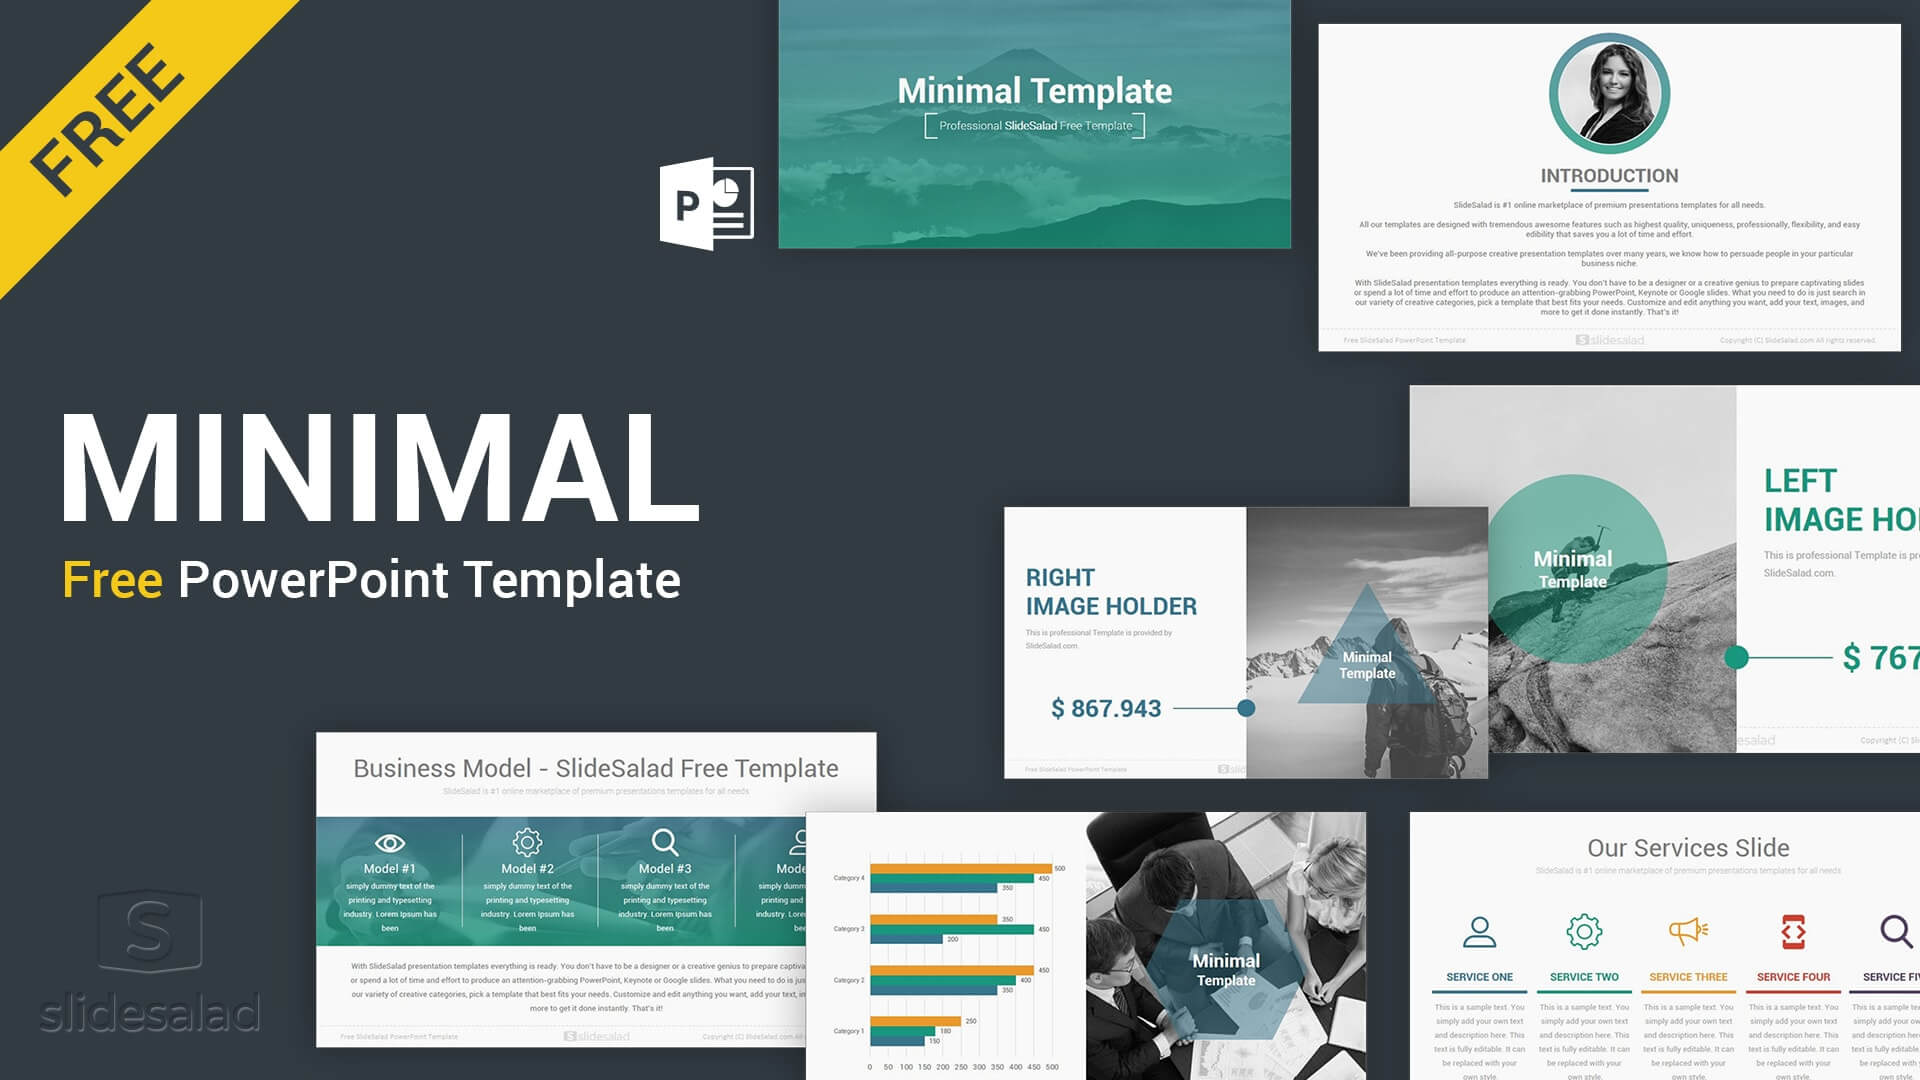 Best Free Presentation Templates Professional Designs 2019 Throughout Powerpoint Slides Design Templates For Free